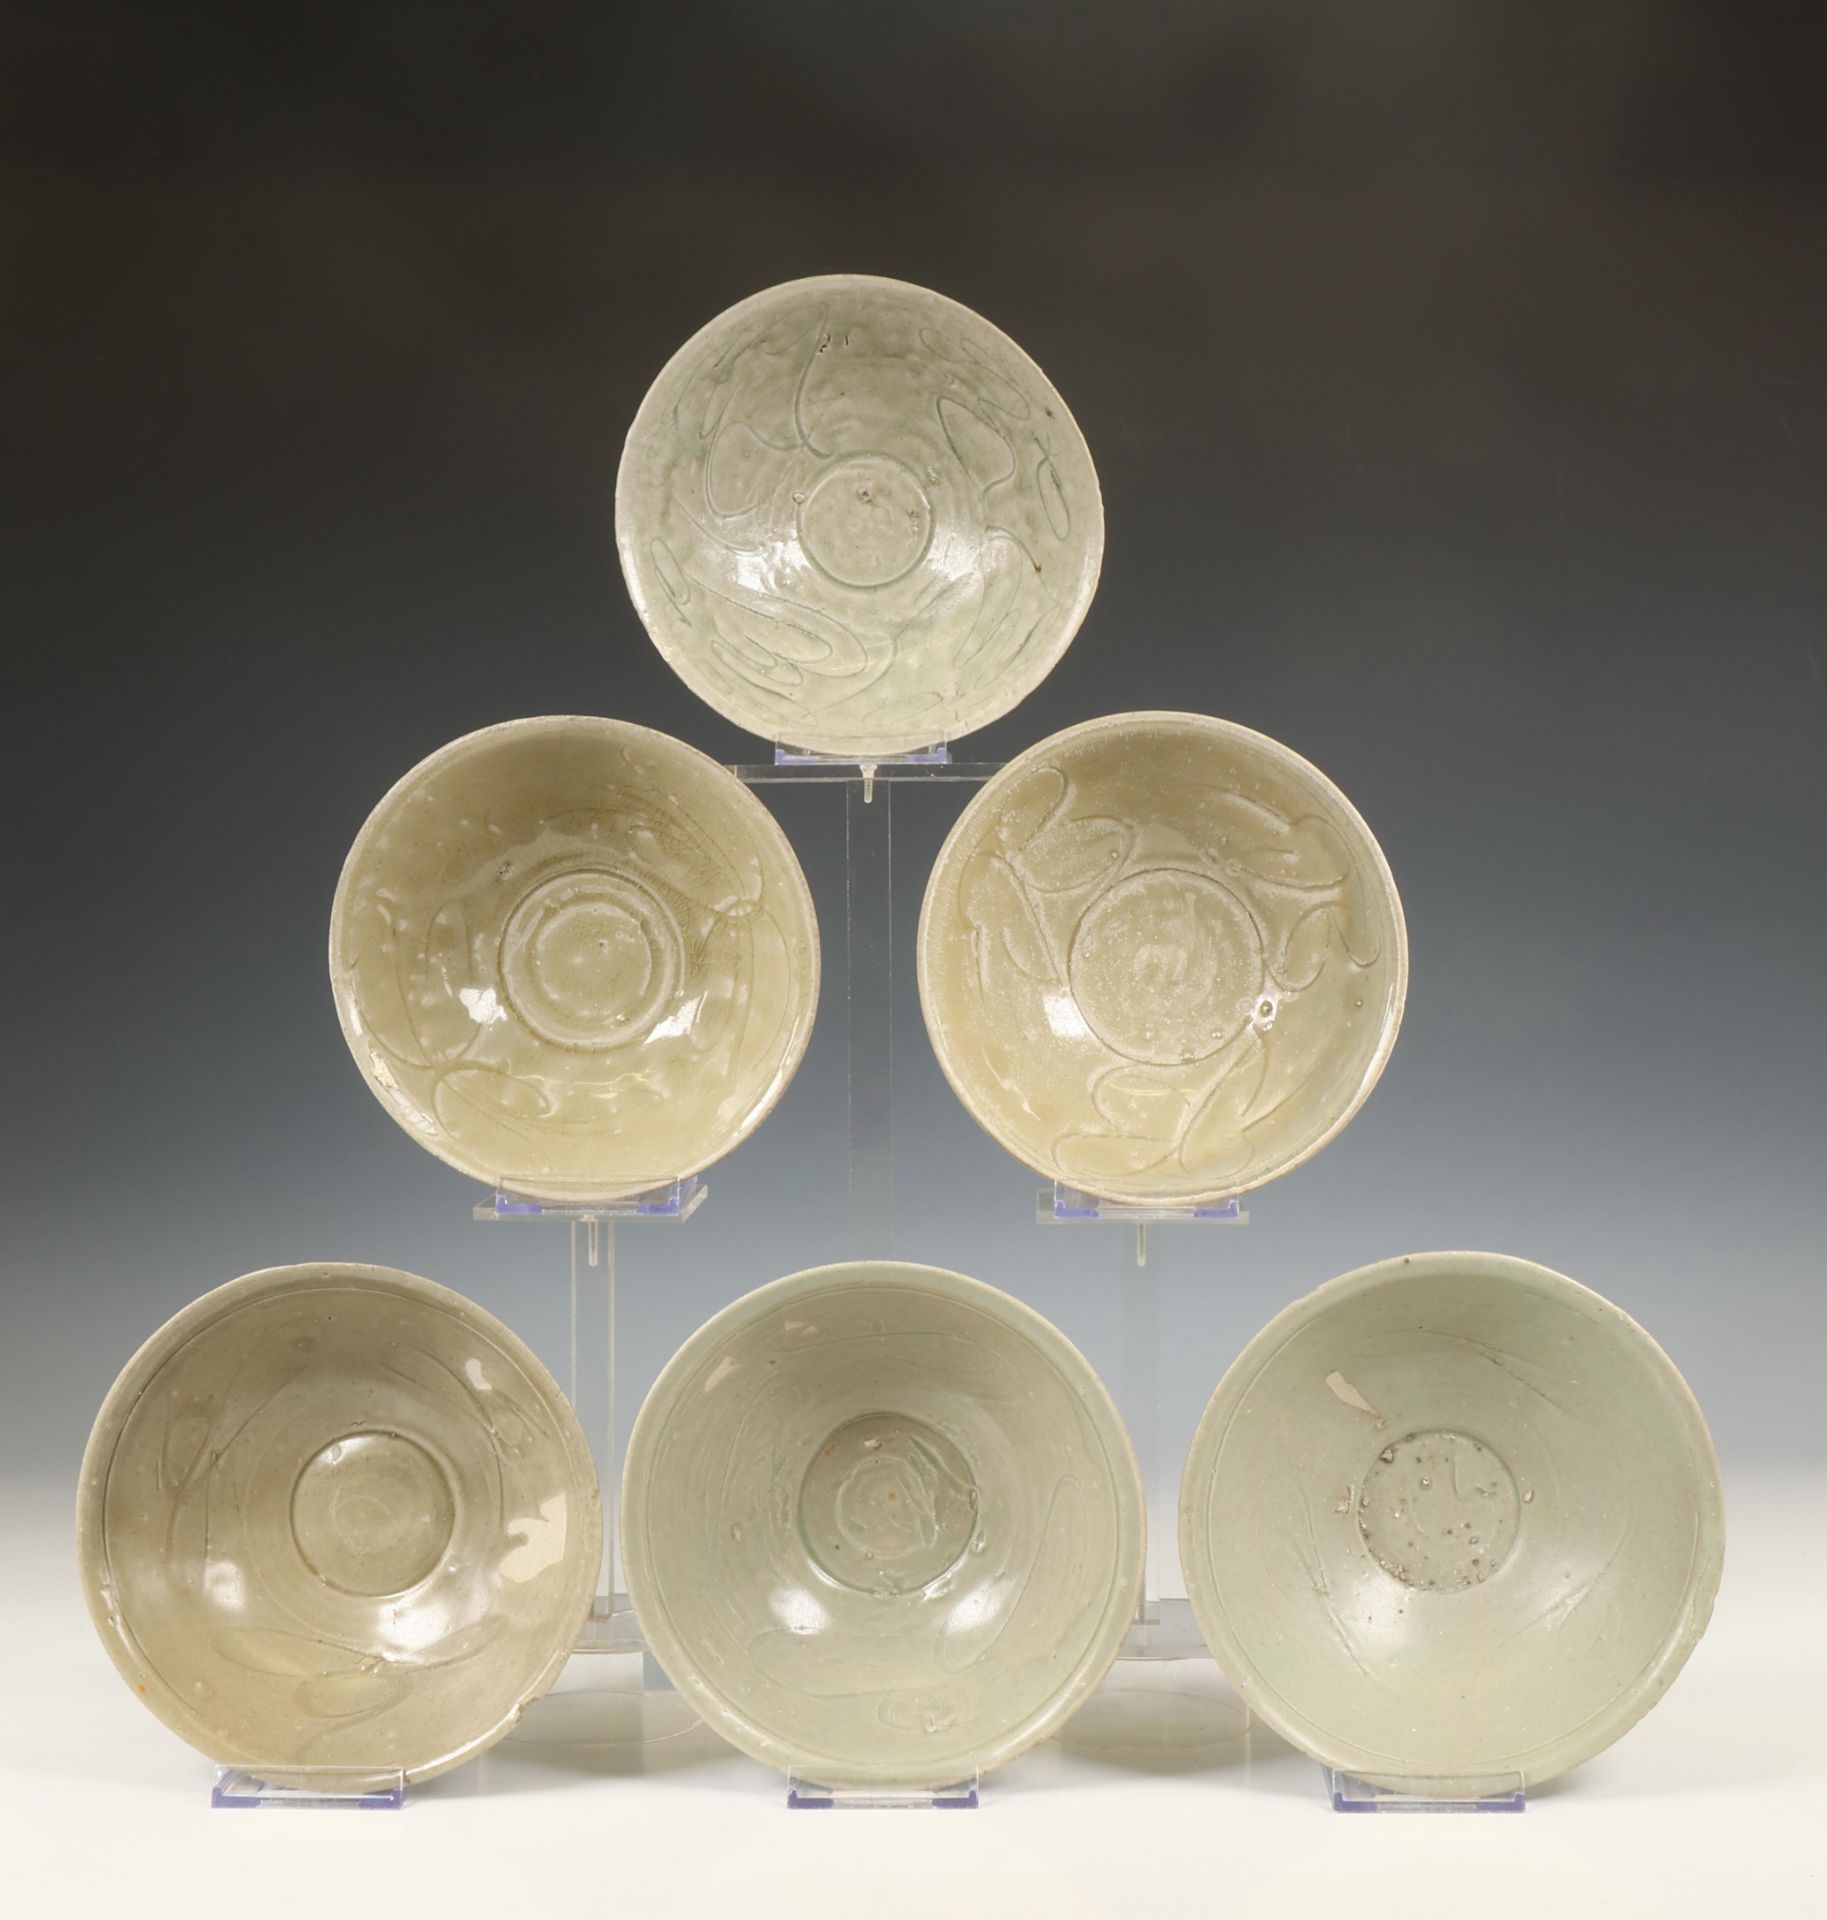 China, collection of various celadon-glazed bowls, Northern Song dynasty, 10th-12th century, - Image 7 of 8